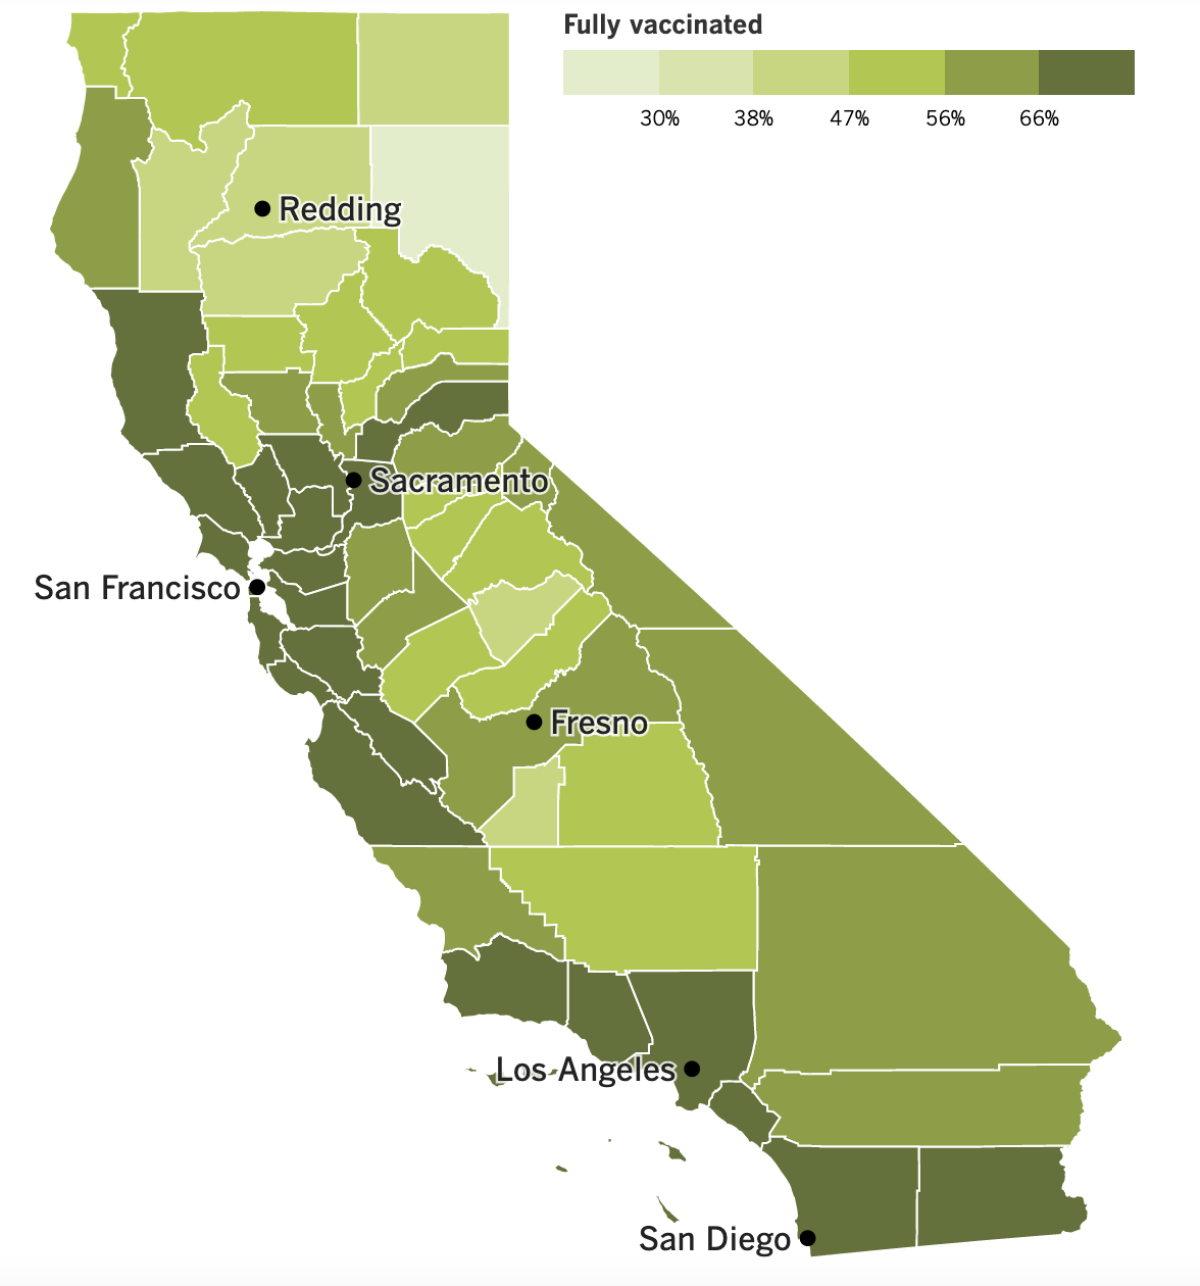 A map showing California's vaccination progress by county as of March 22, 2022.